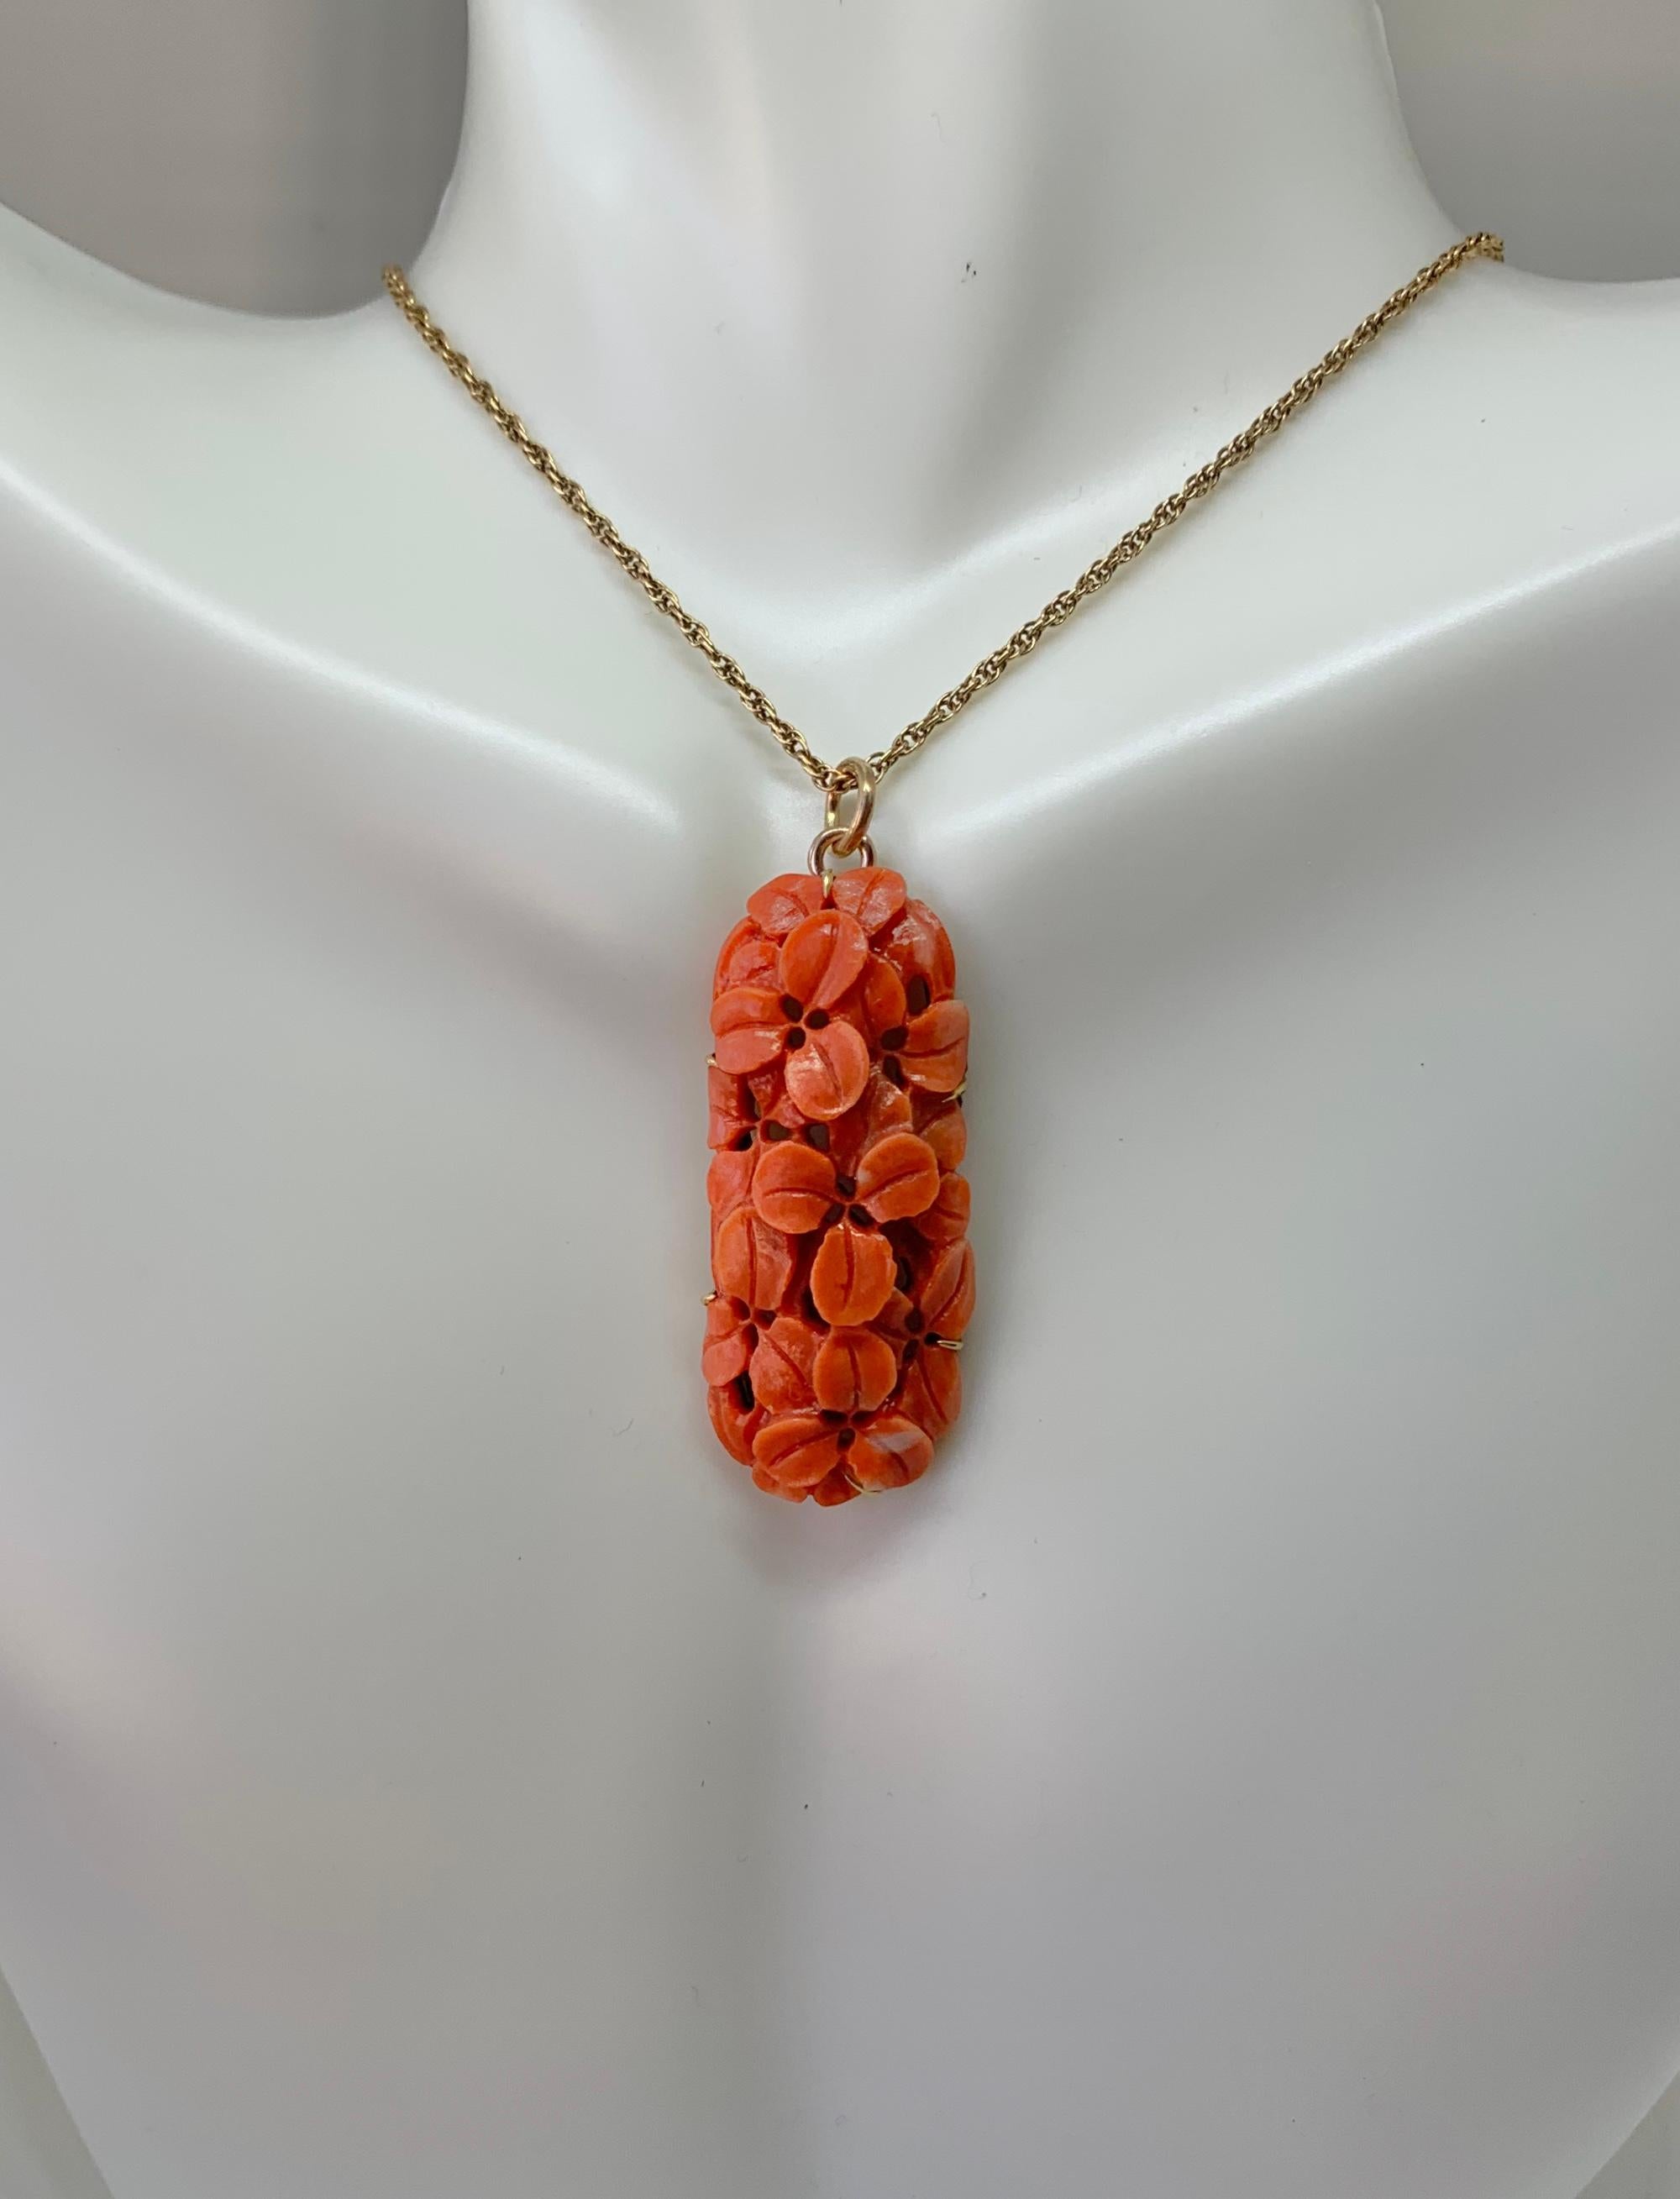 This is a stunning antique Victorian Pendant of hand carved Coral with a design of flowers or leaves.  The coral is set in 9 Karat Yellow Gold.   The coral pendant is a beautiful example of artistic expression - the leaves have incredible three